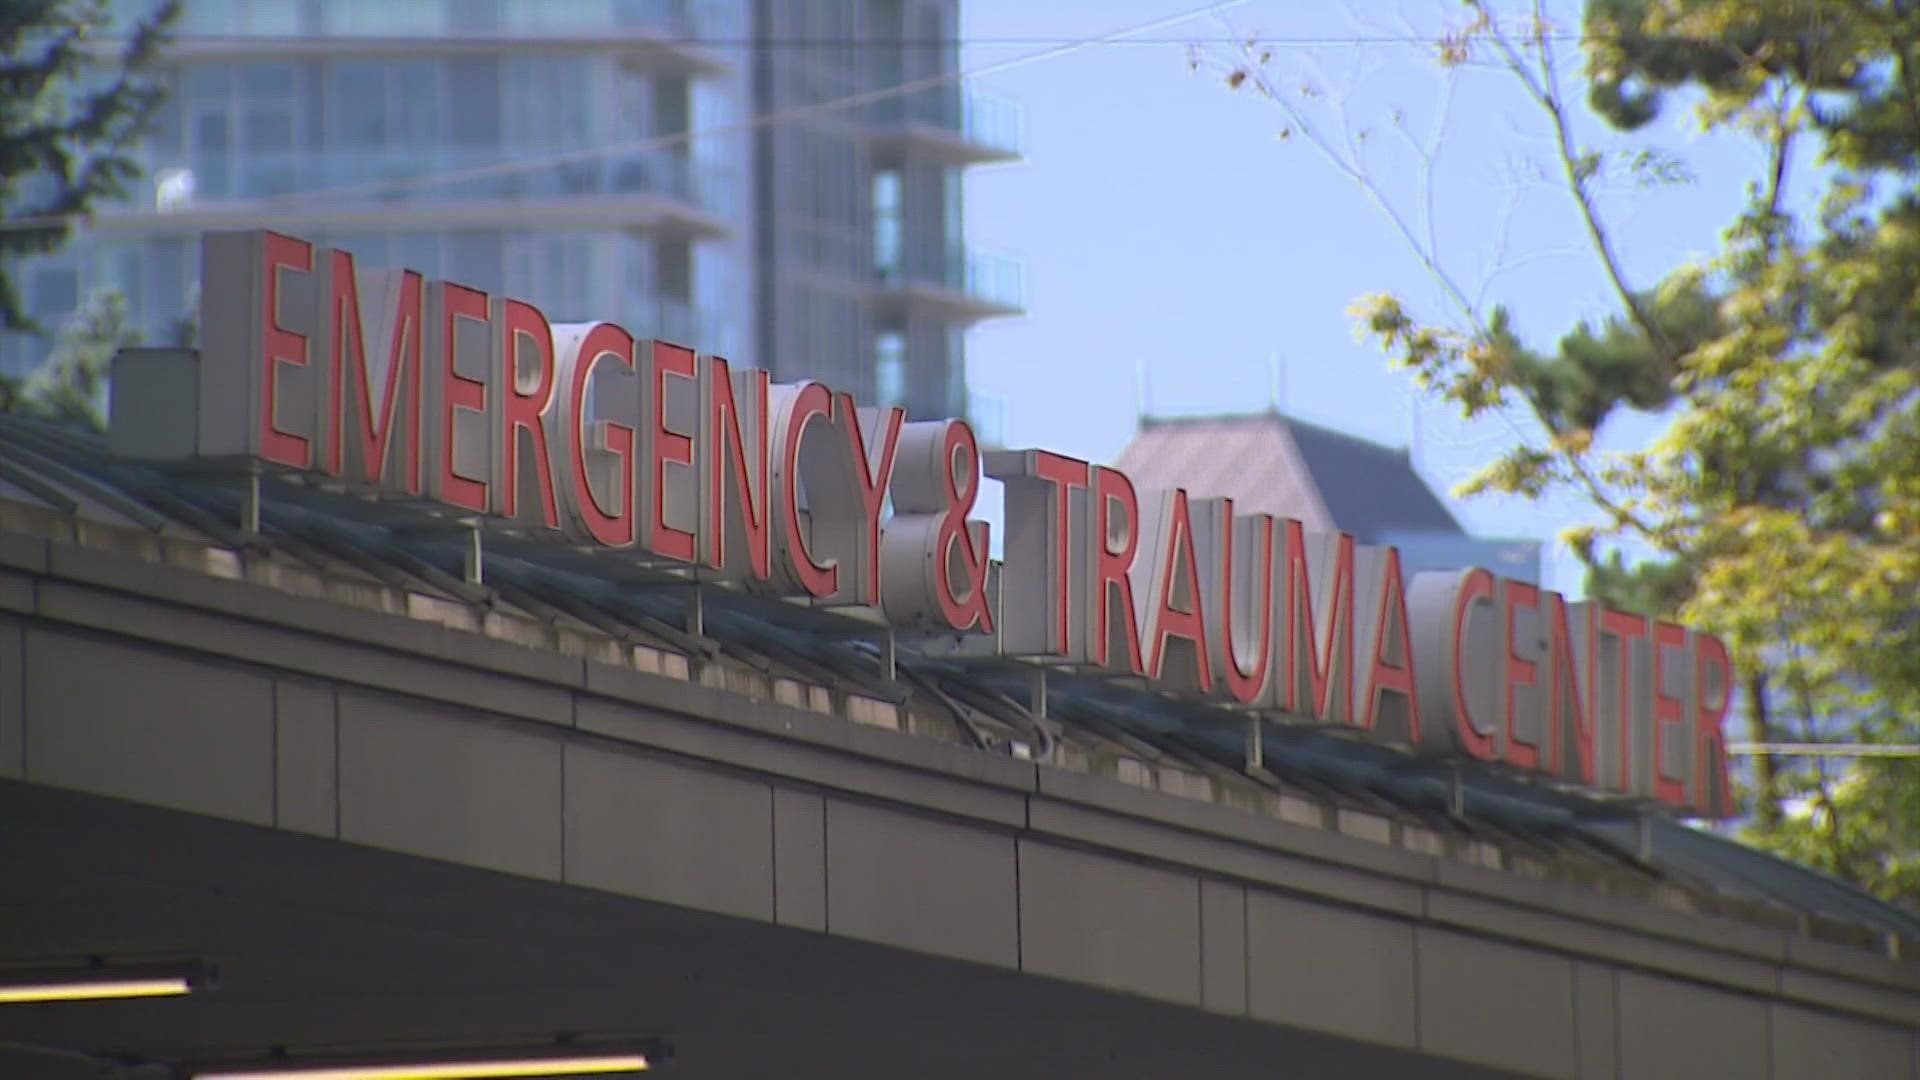 Washington state hospitals continue to struggle financially and healthcare leaders say it's impacting patient care.